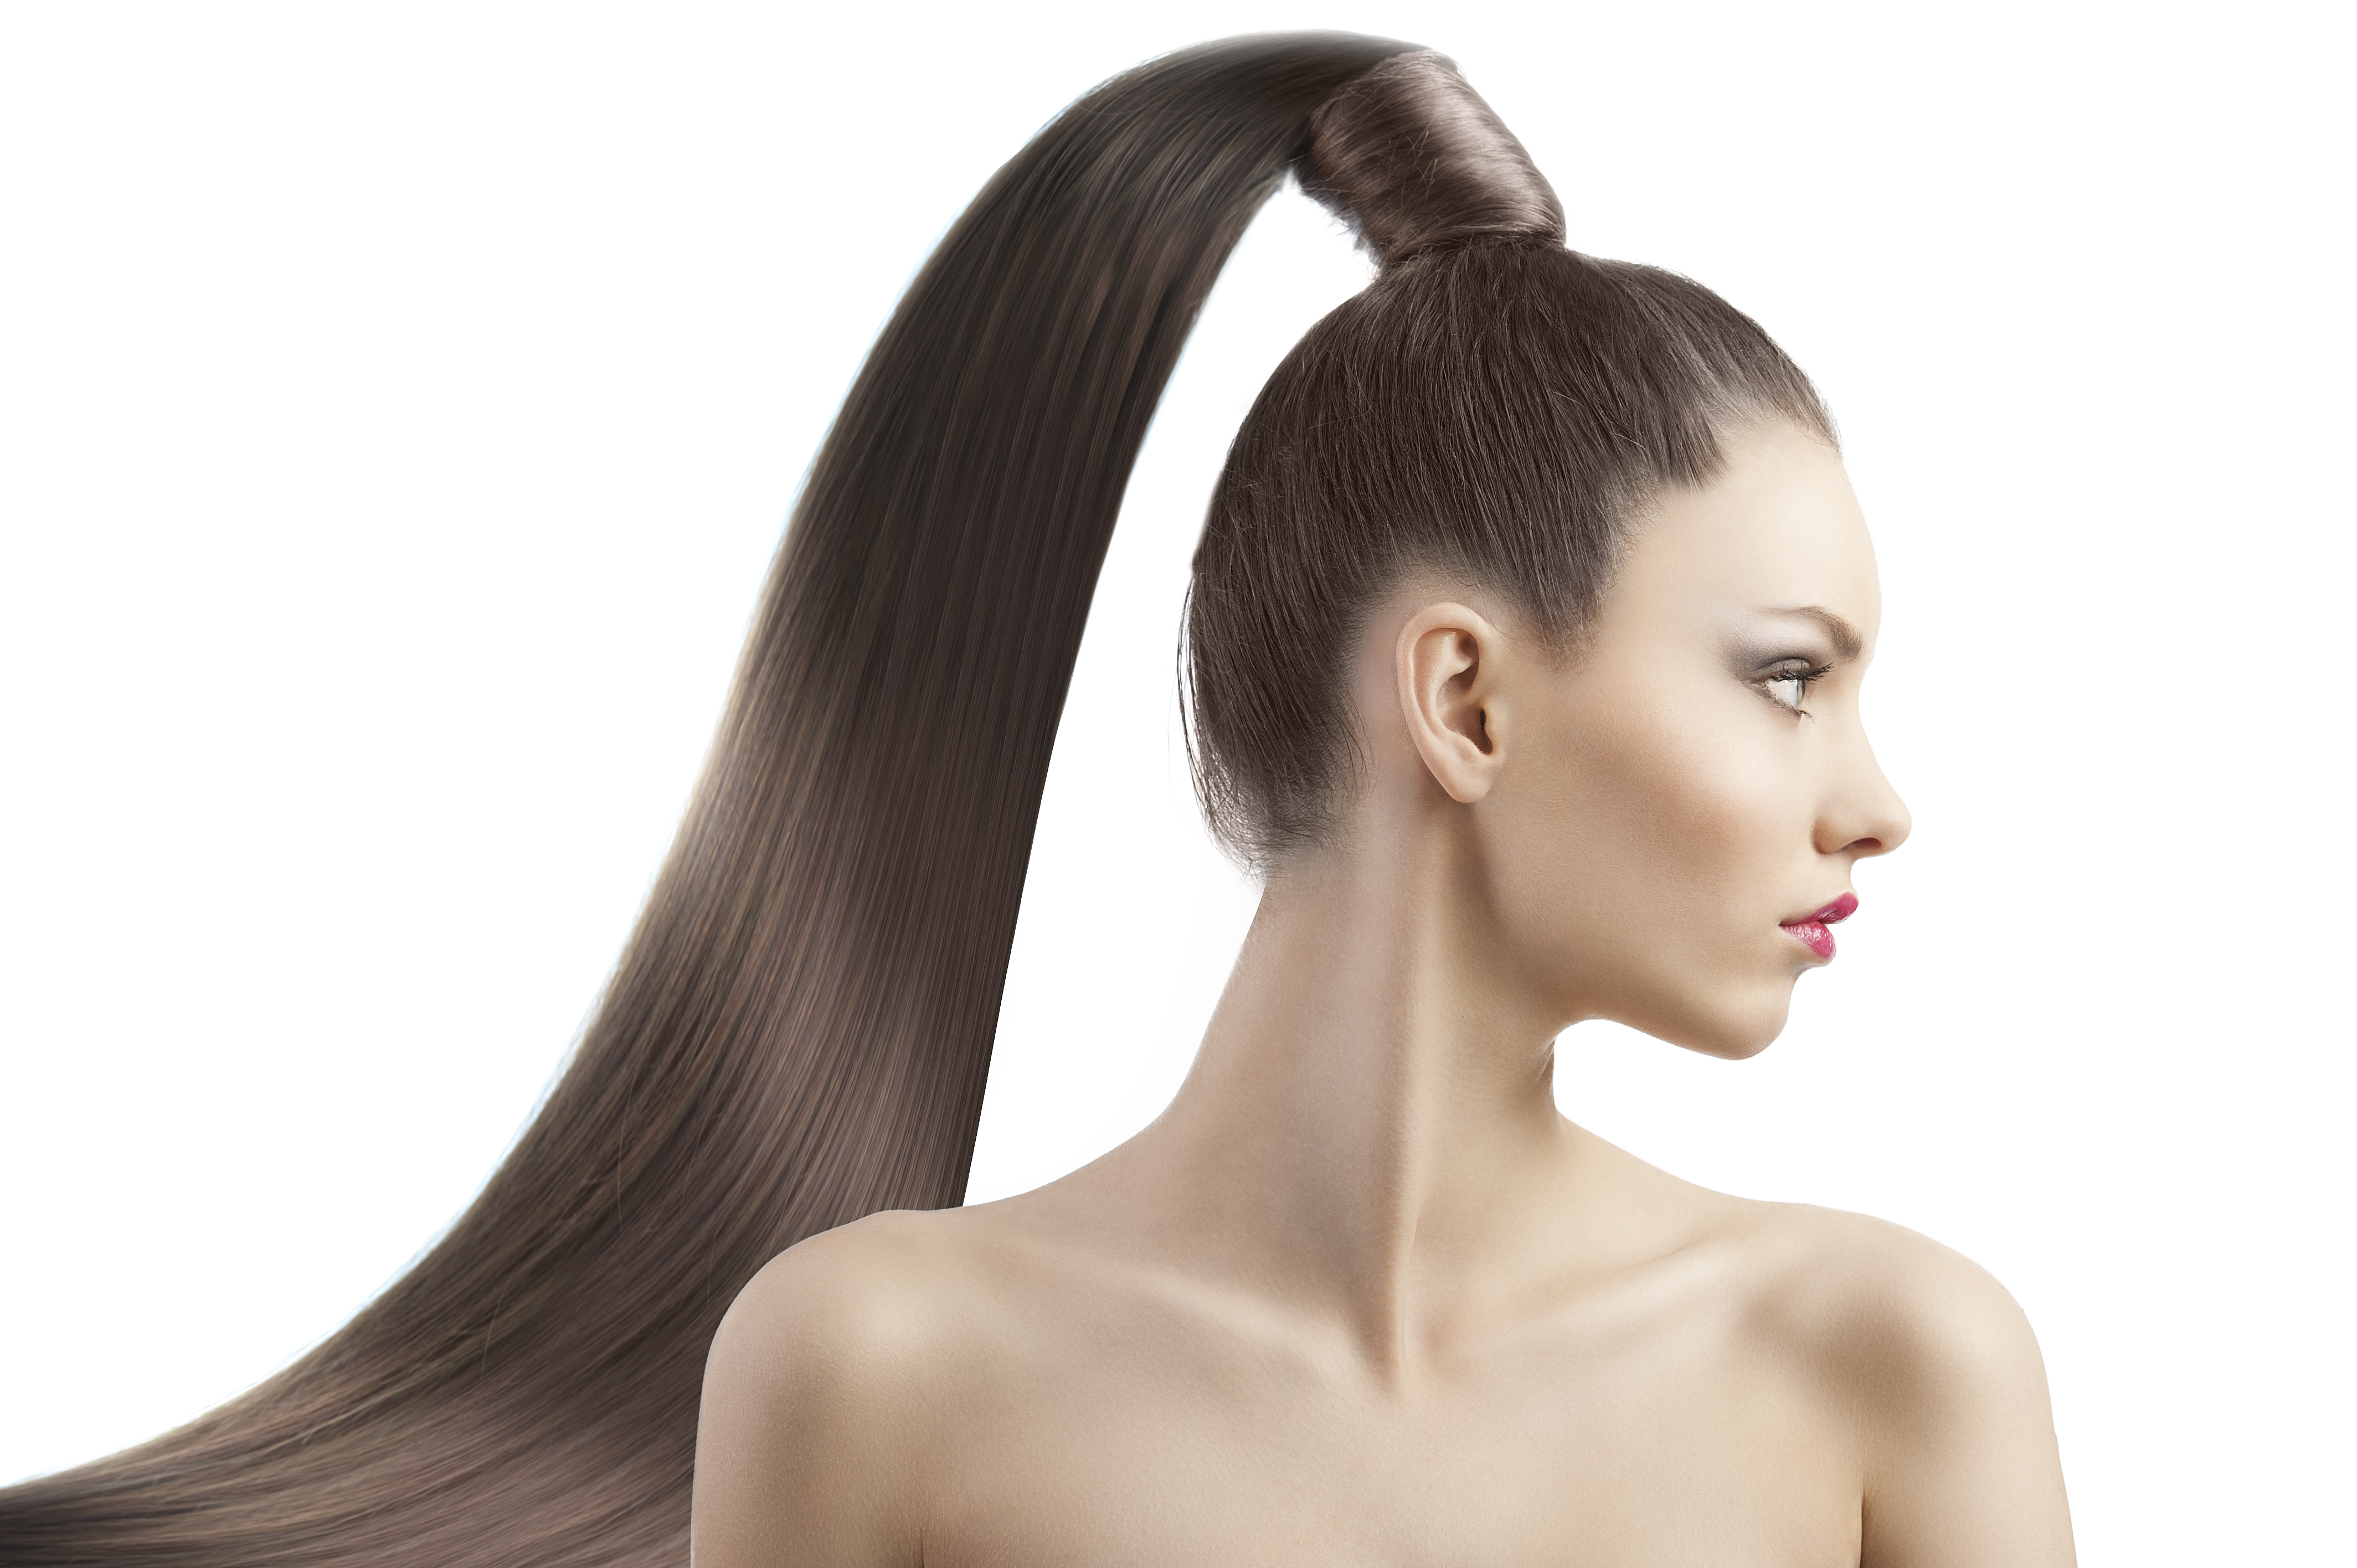 A woman with extremely long hair in a ponytail | Source: Shutterstock